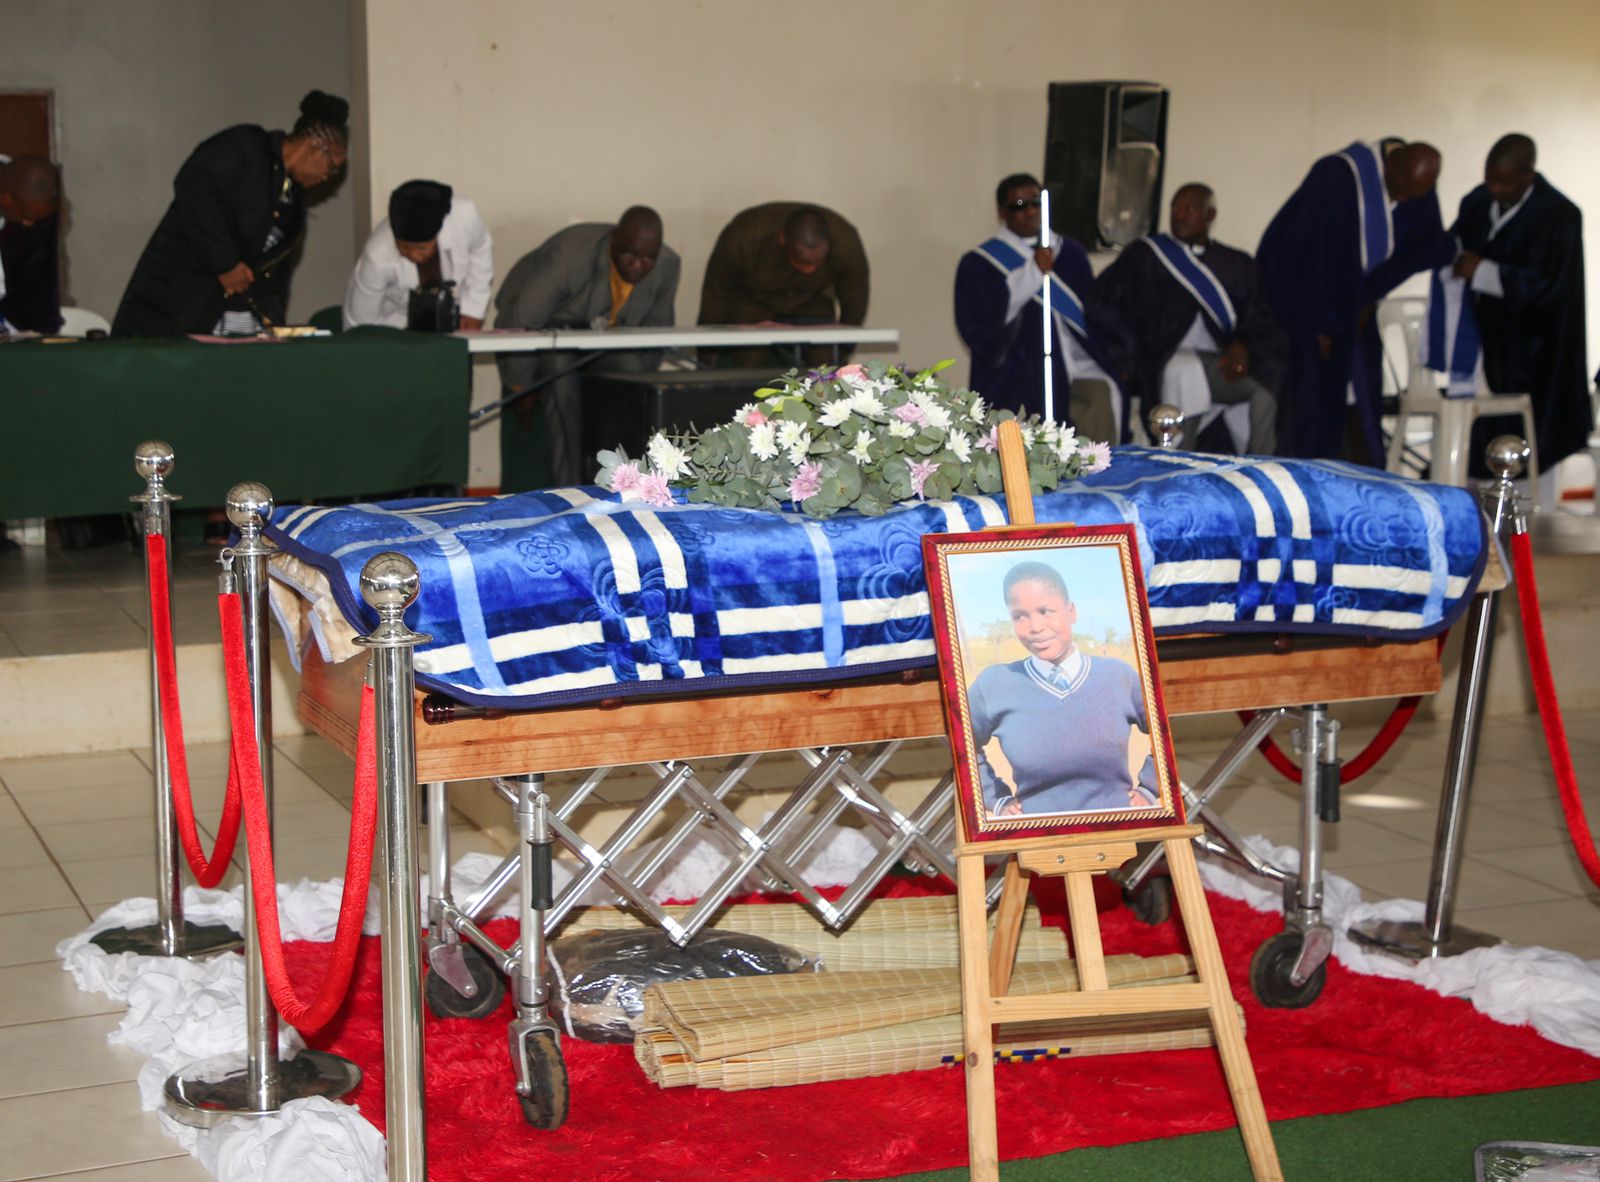 Lwakhele, one of the seven learners who lost their lives in bus accident, burried